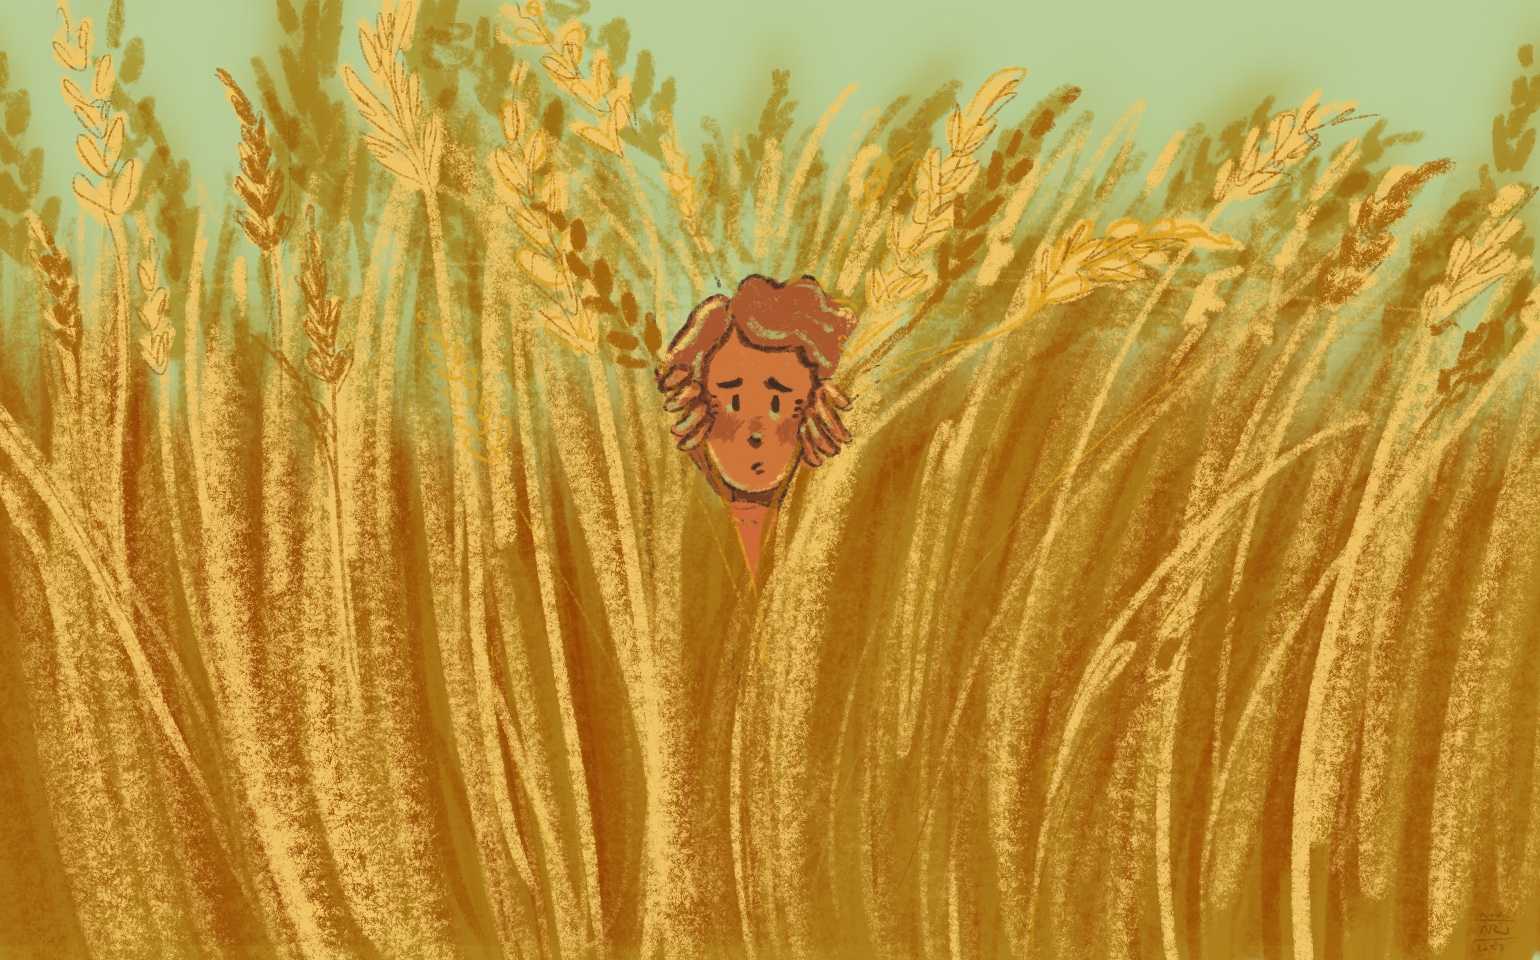 A person peers out timidly from a wheat field.